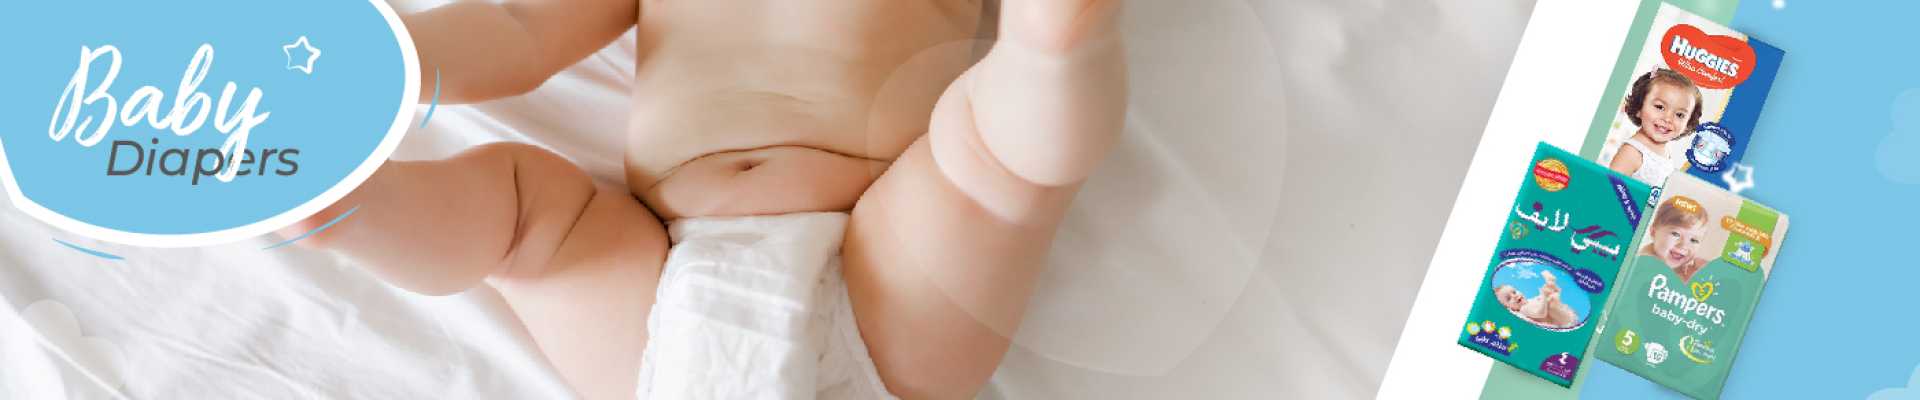 baby diapers slider